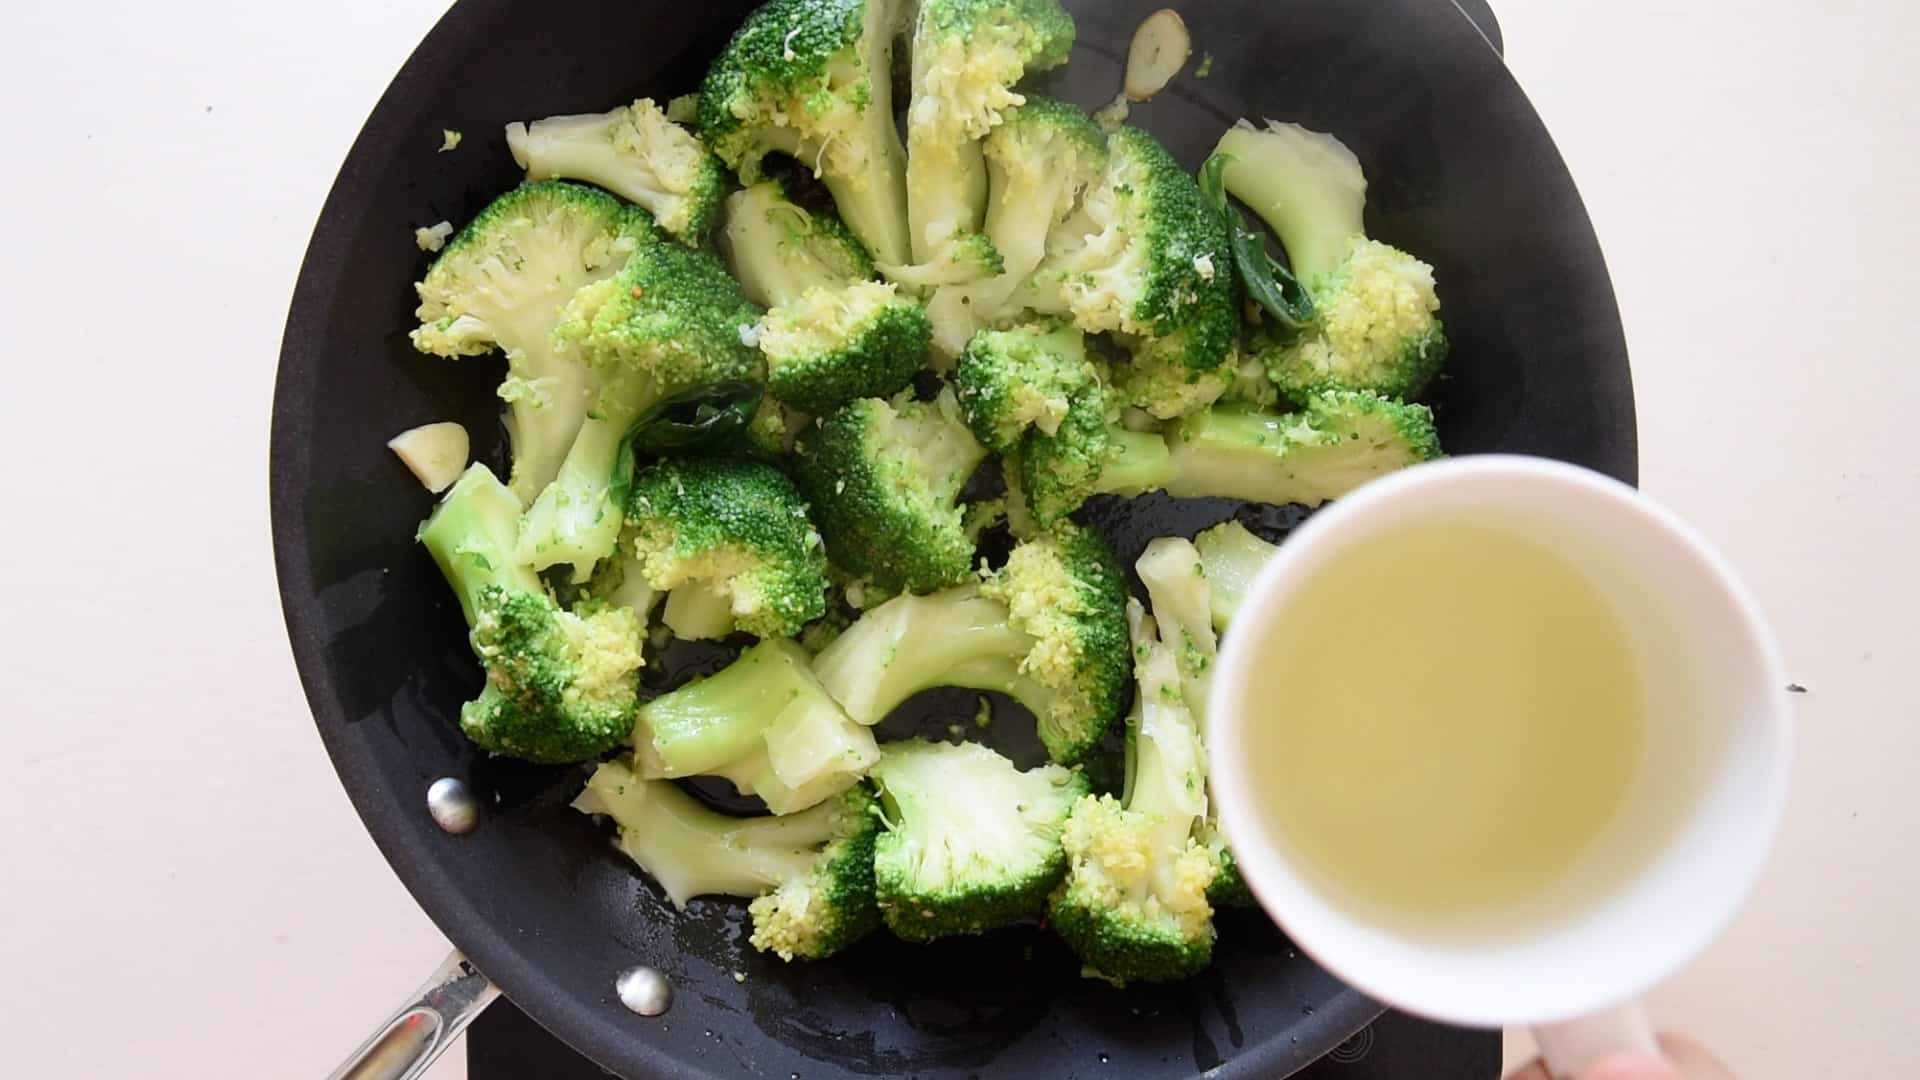 Add some cooking water to the sauteed broccoli